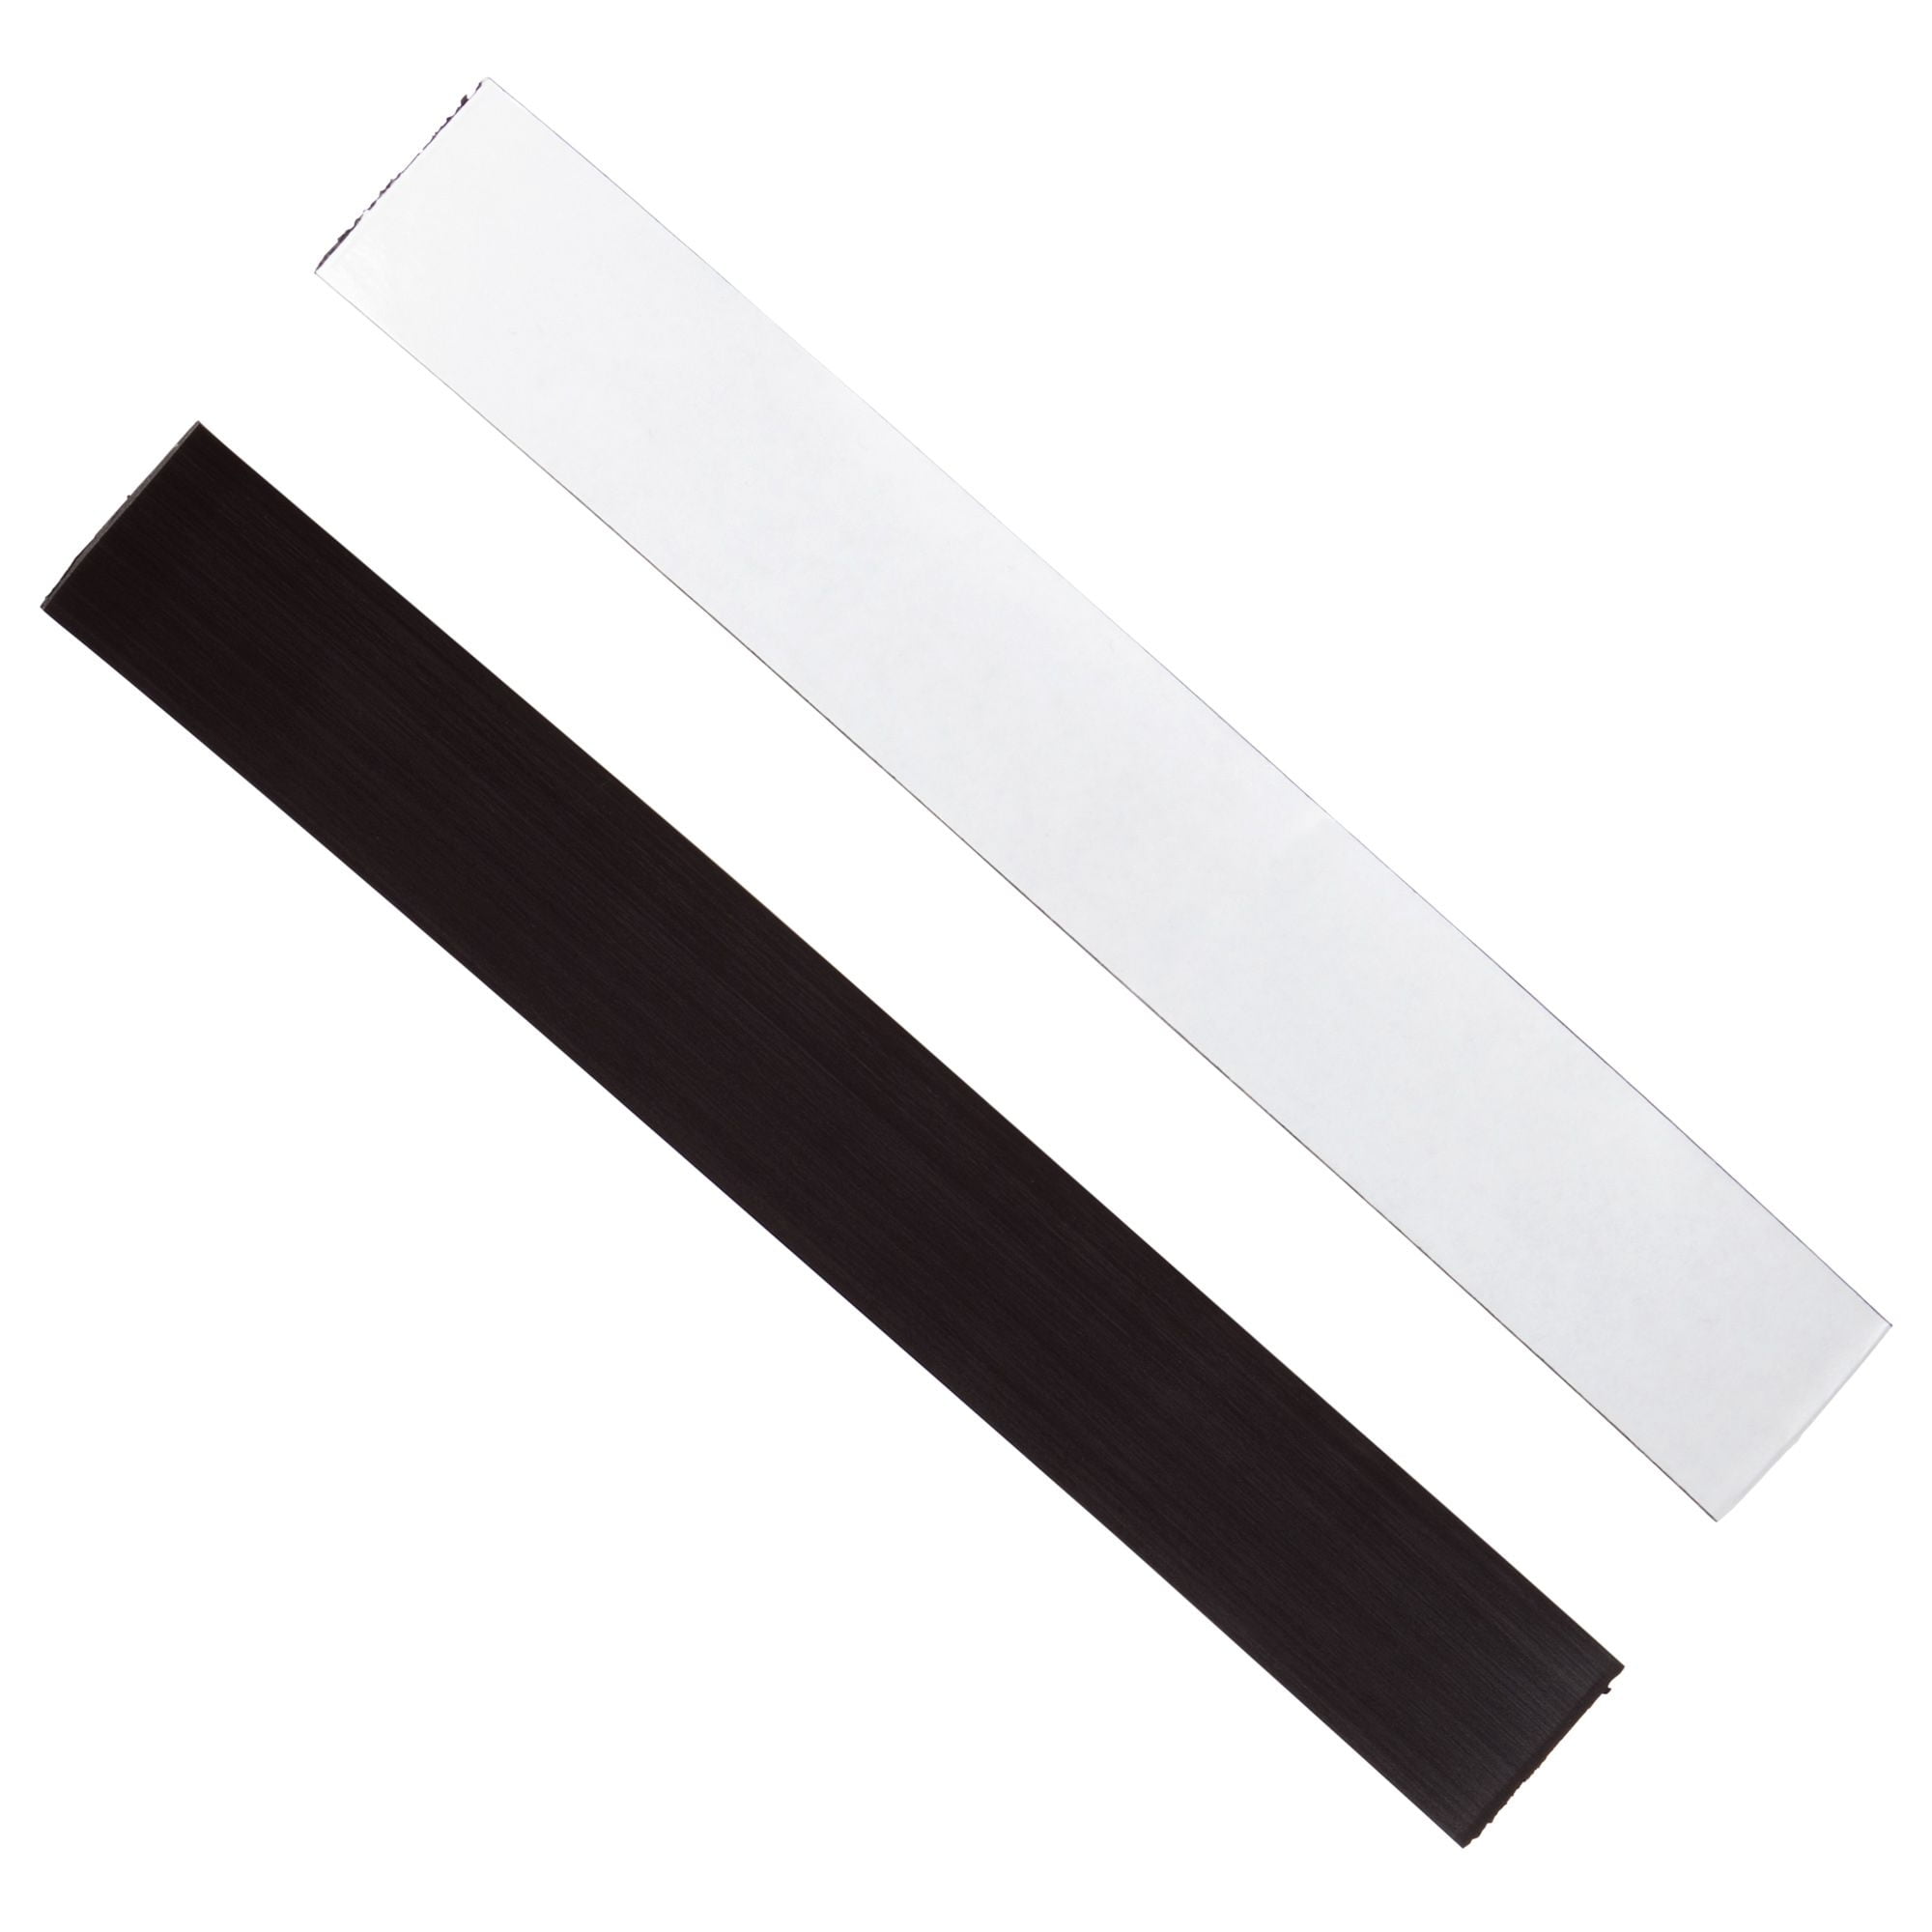 Flexible Magnet Strip with White Vinyl Coating, 1/32 Thick, 1 Height, 50  Feet, Scored Every 2, 1 Roll with 294-1 x 2 Pieces